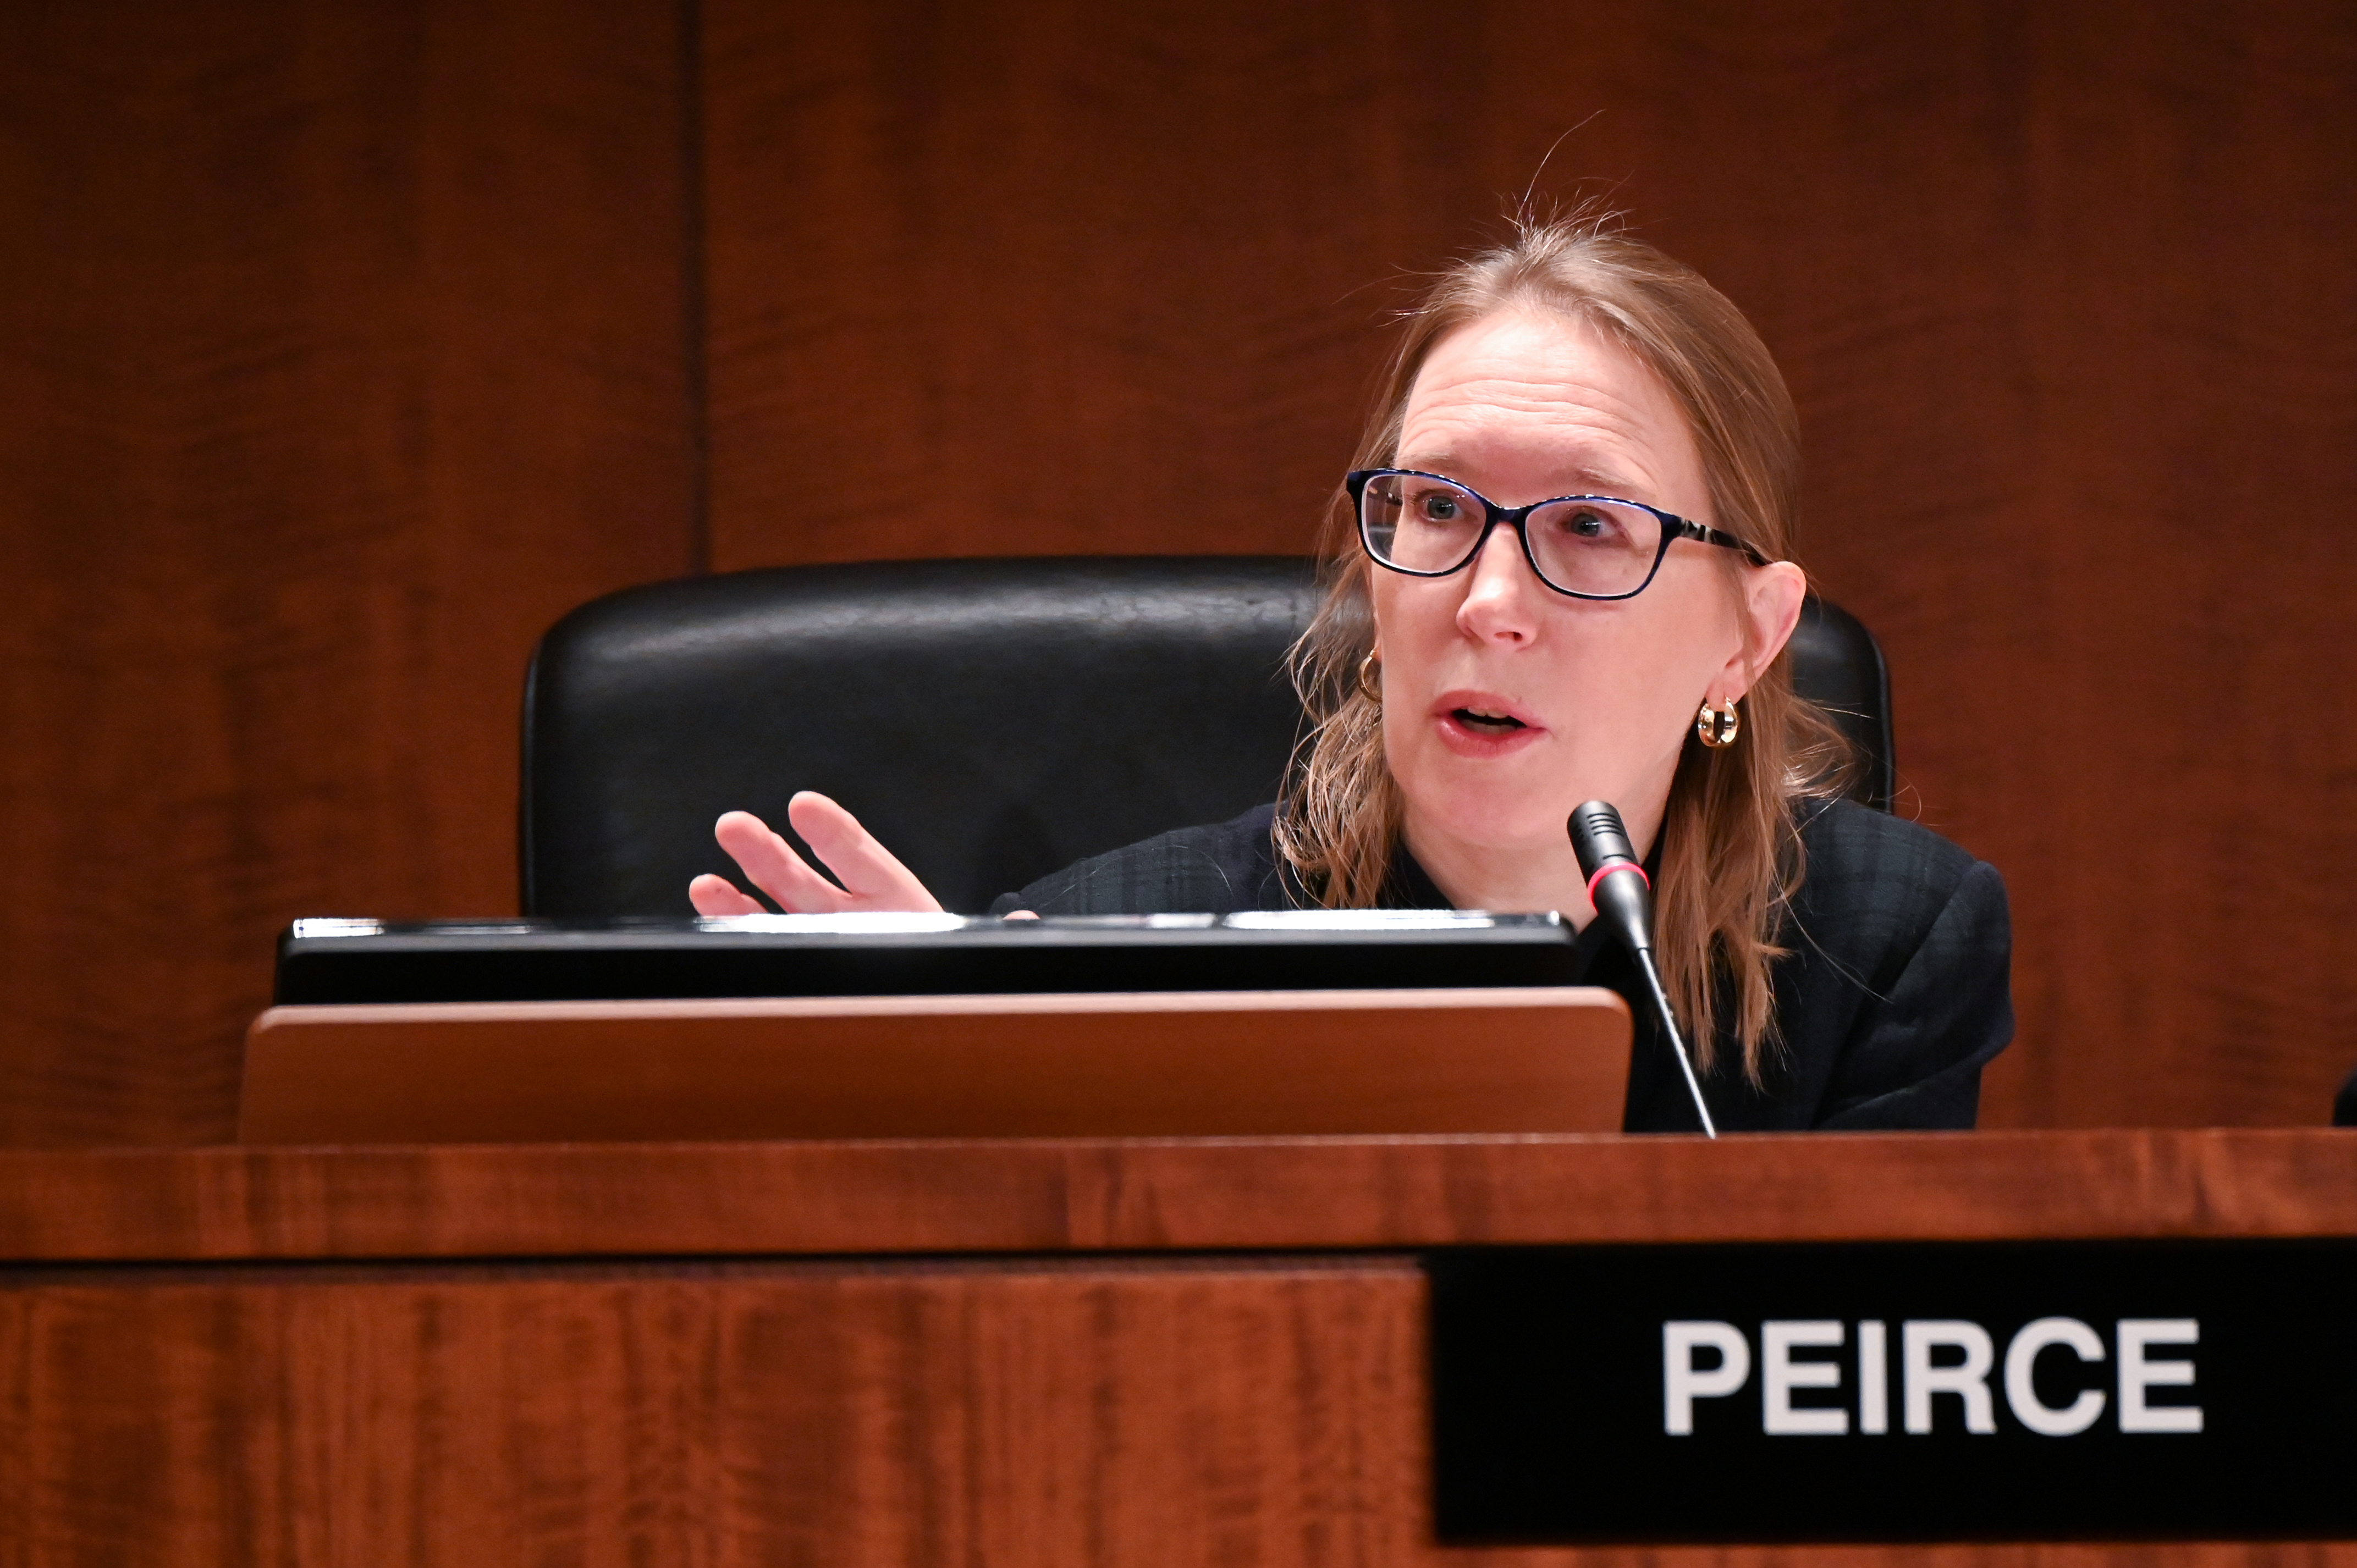 Commissioner Peirce participates in a U.S Securities and Exchange Commission open meeting to propose changing its definition of an 